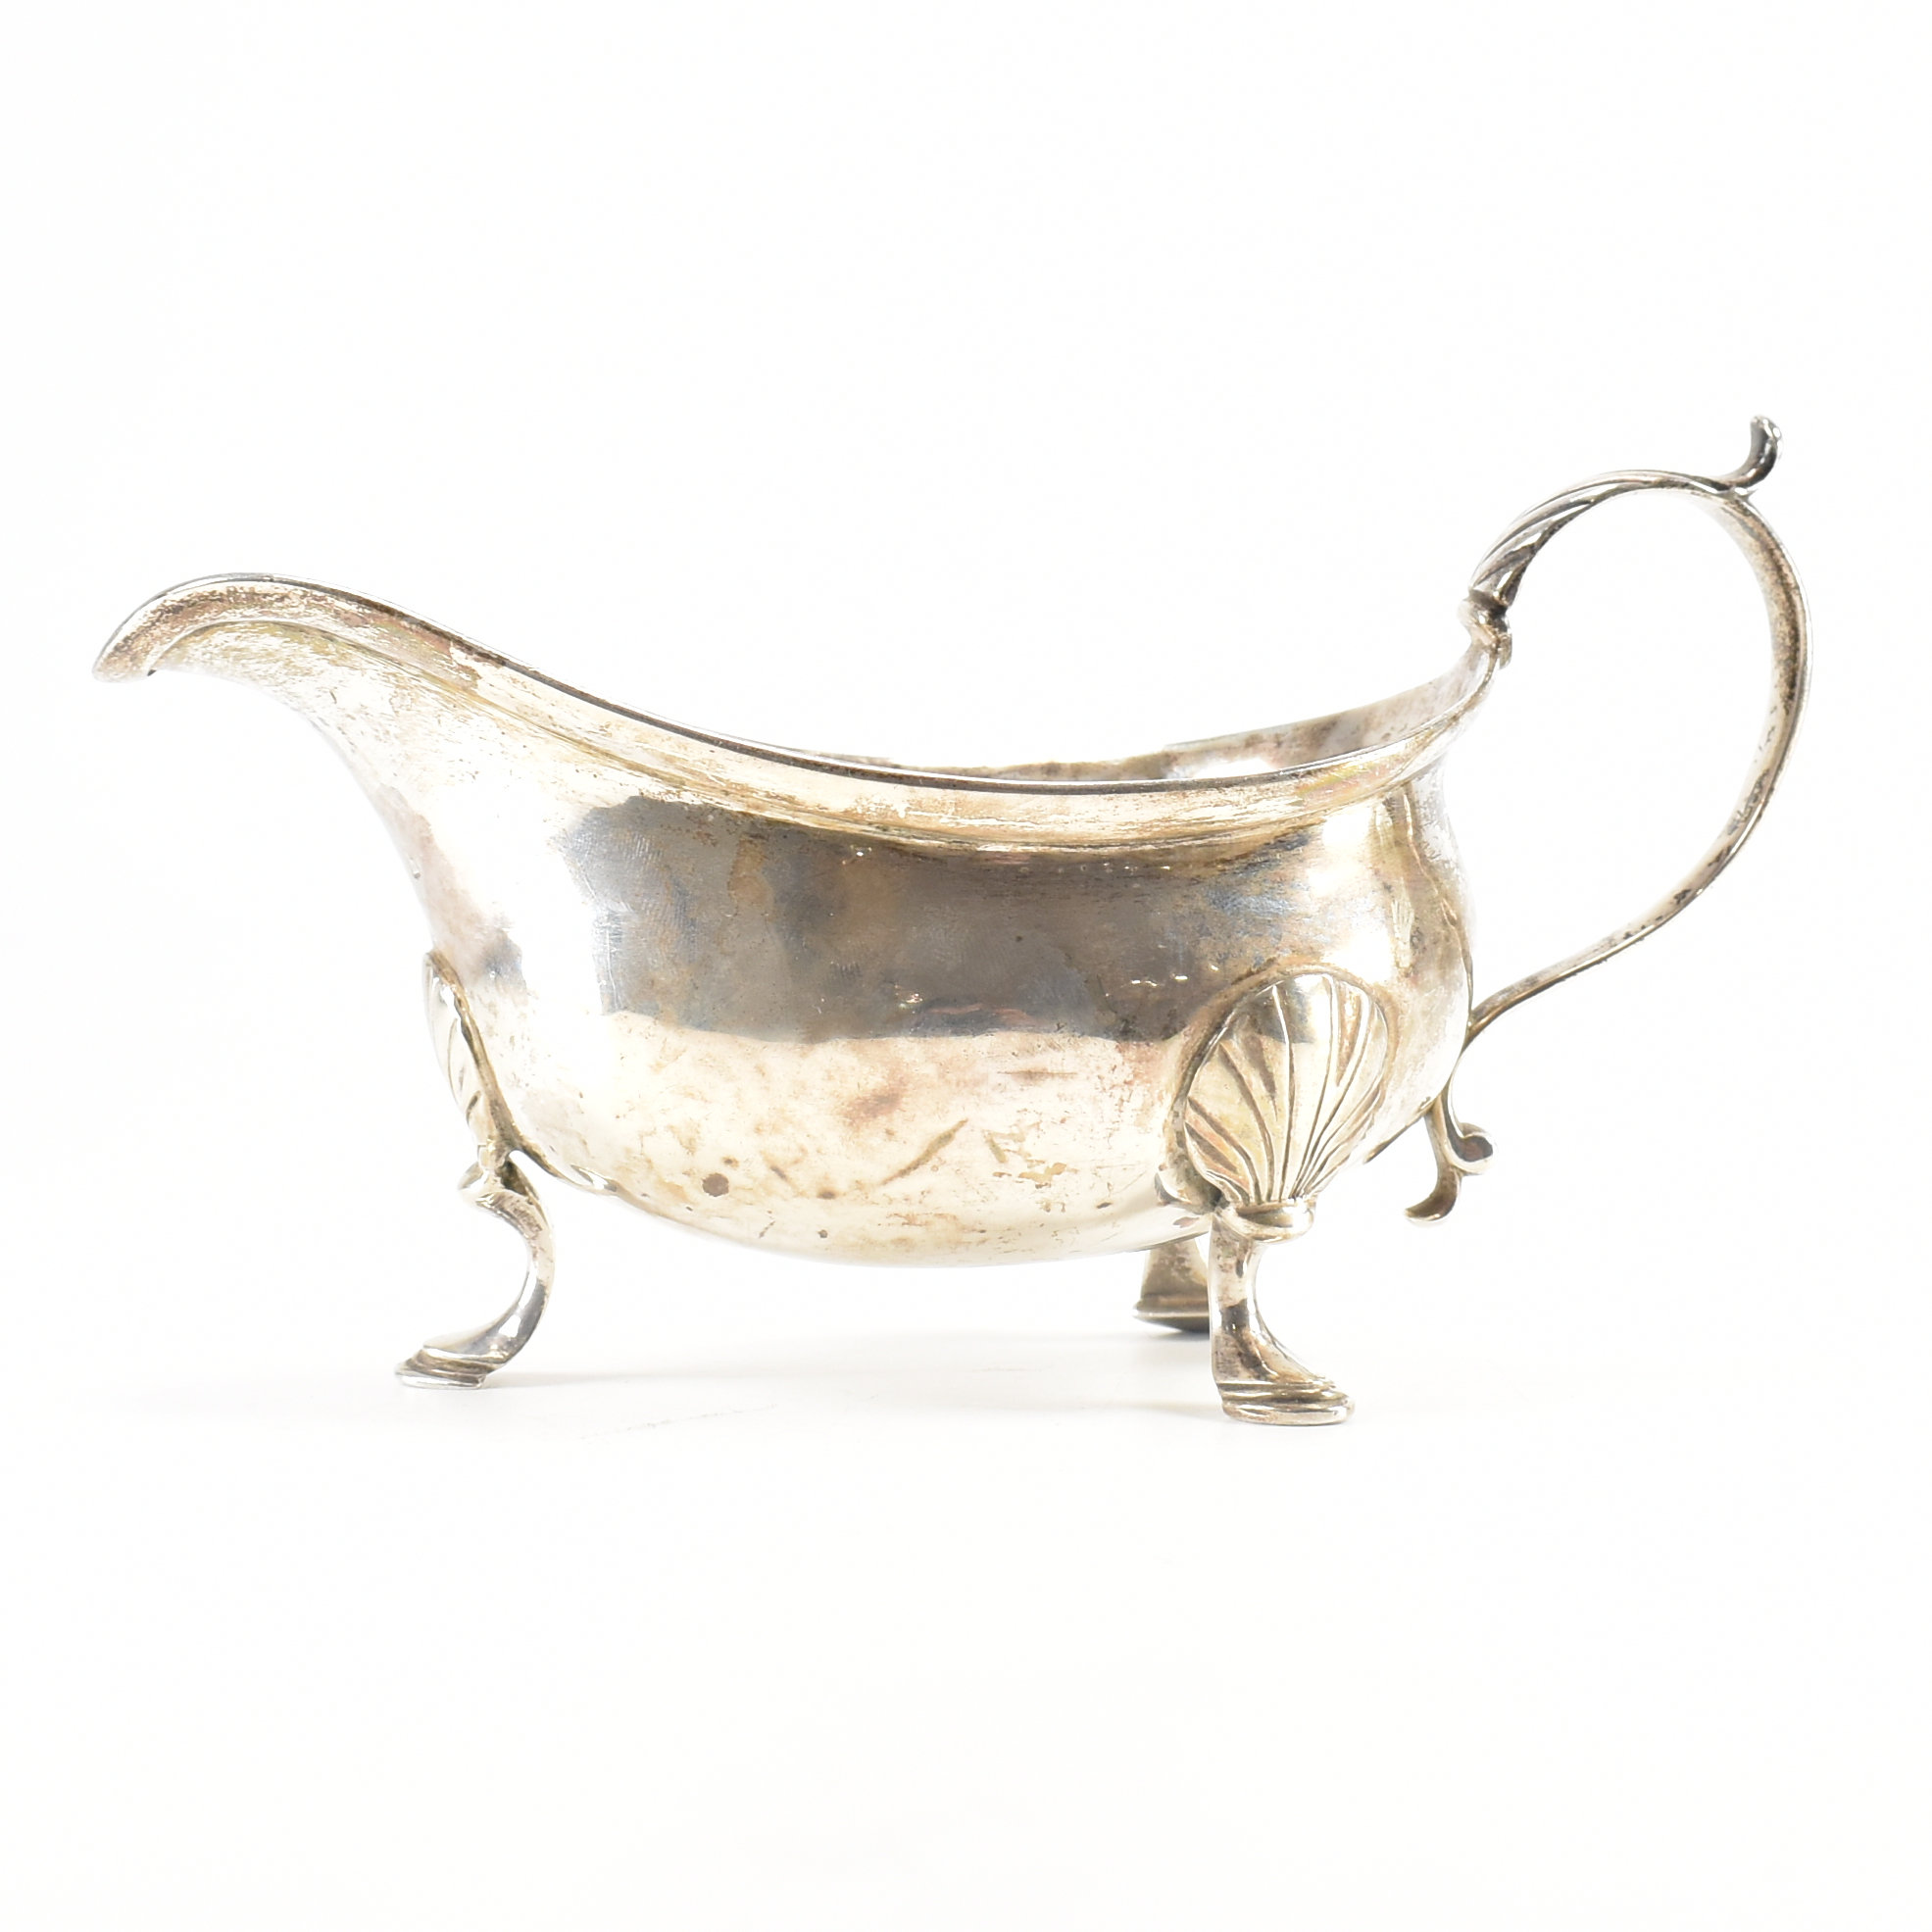 GEORGE III SILVER HALLMARKED SAUCE BOAT - Image 3 of 7